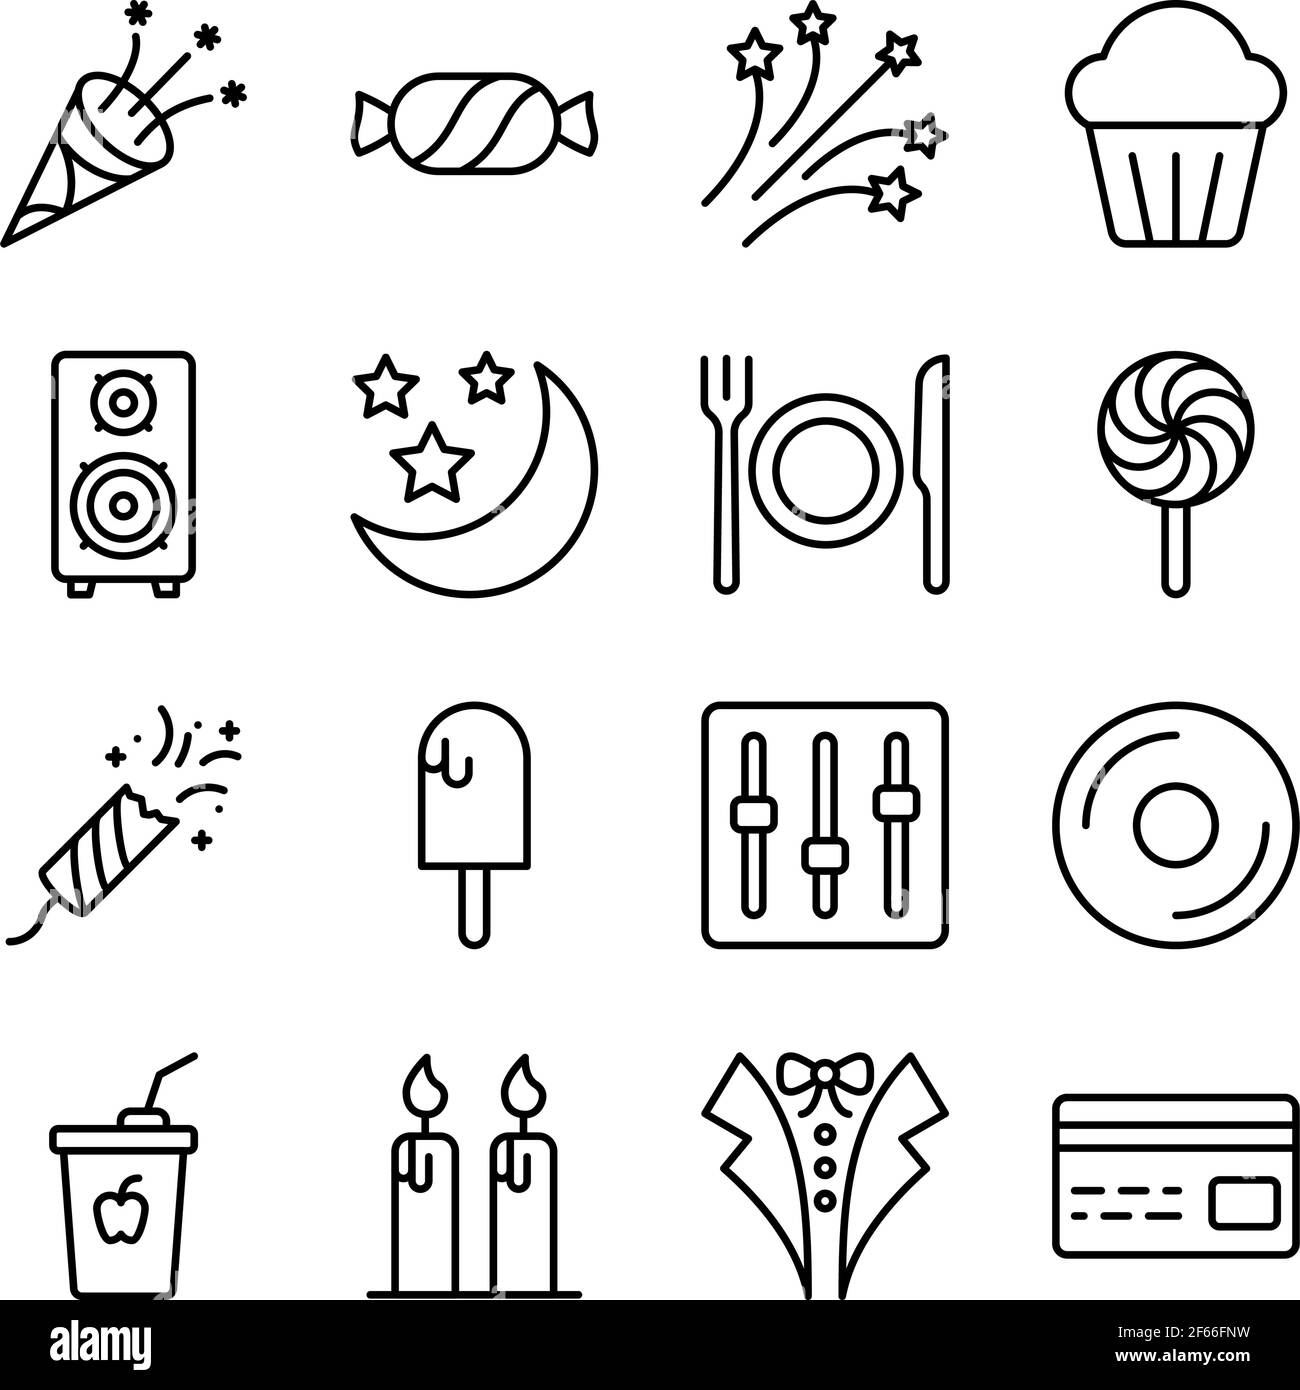 Pack of Party Accessories Linear Icons Stock Vector